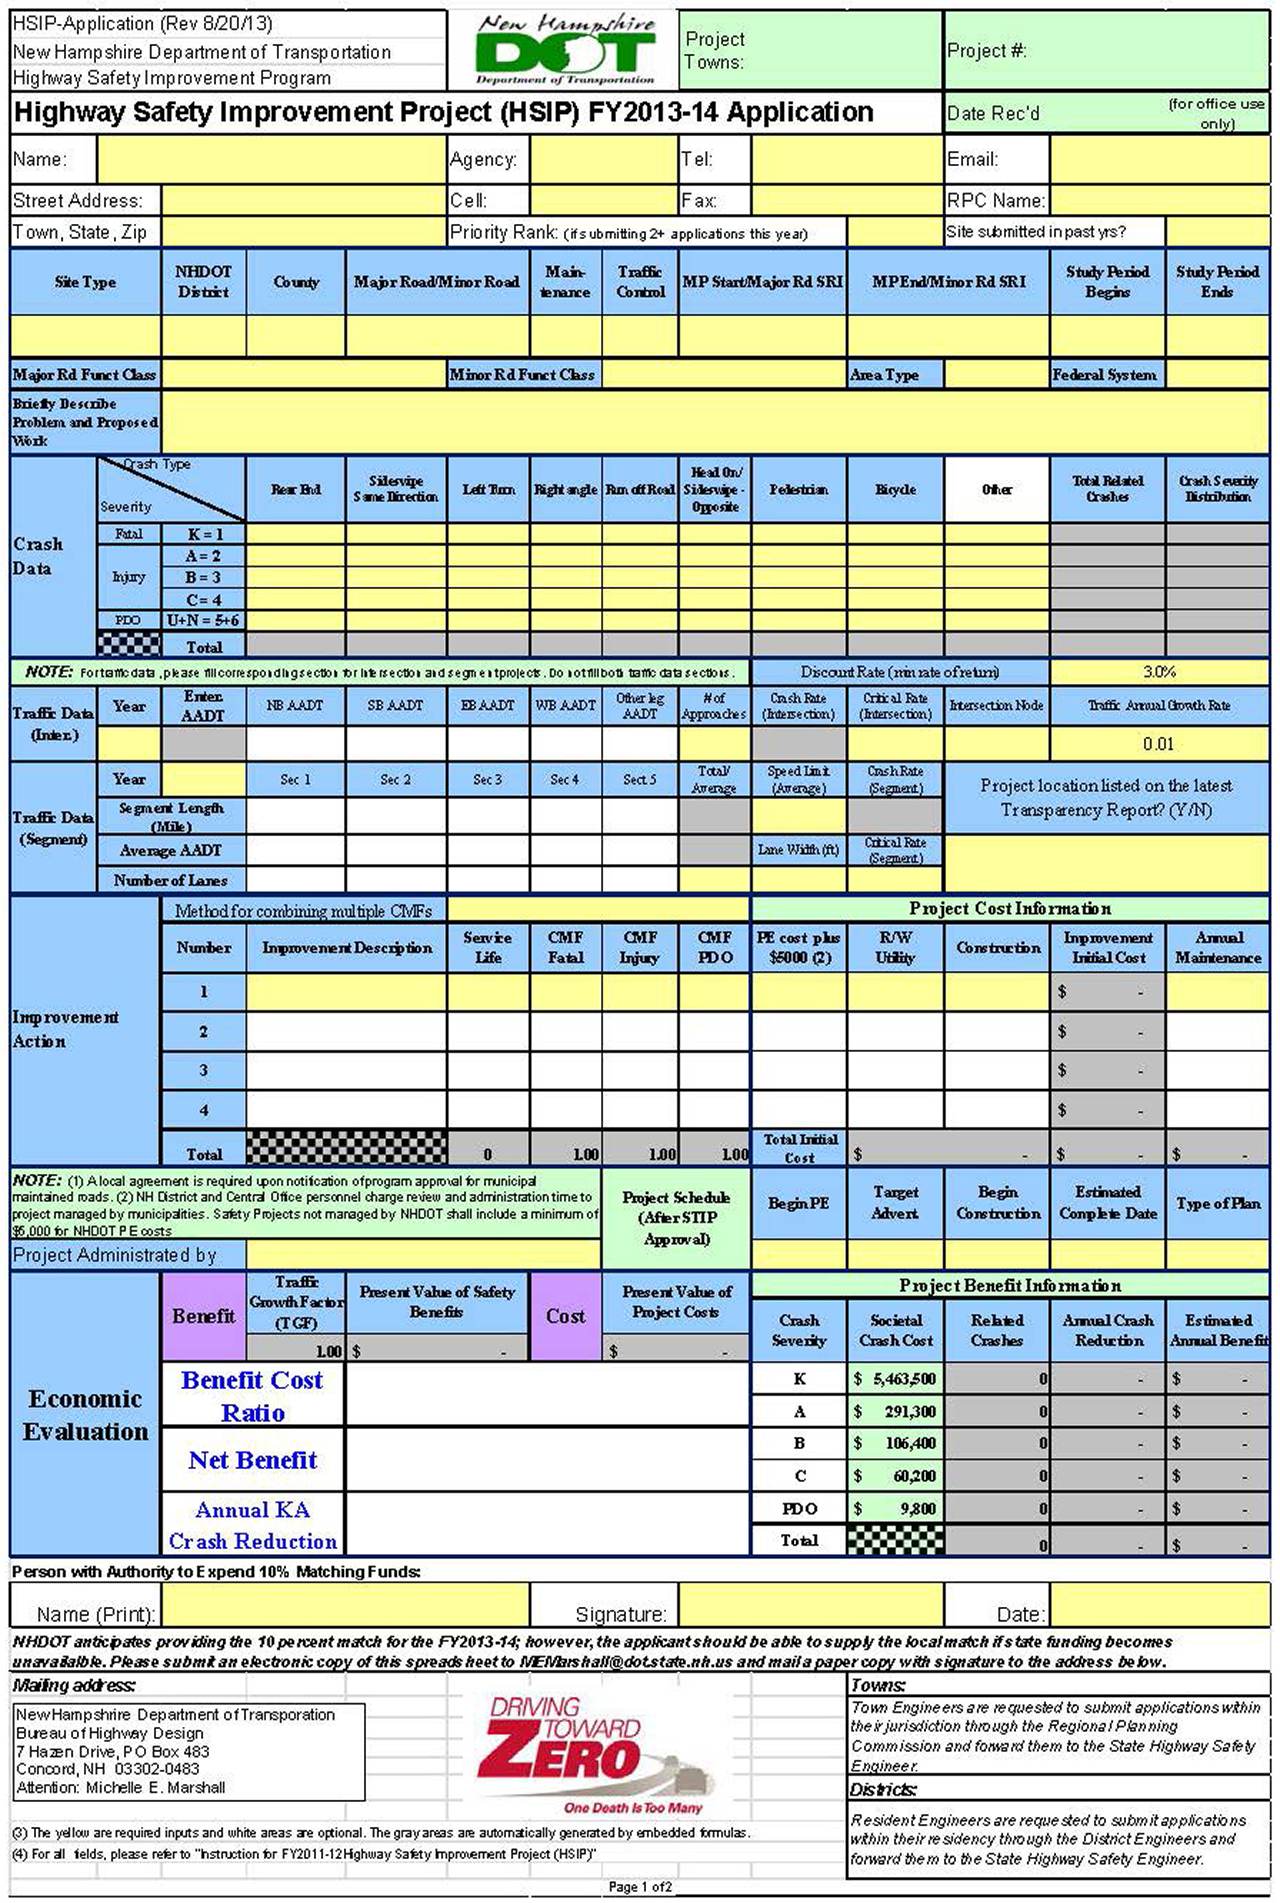 screenshot of the Sample HSIP Project Application Spreadsheet